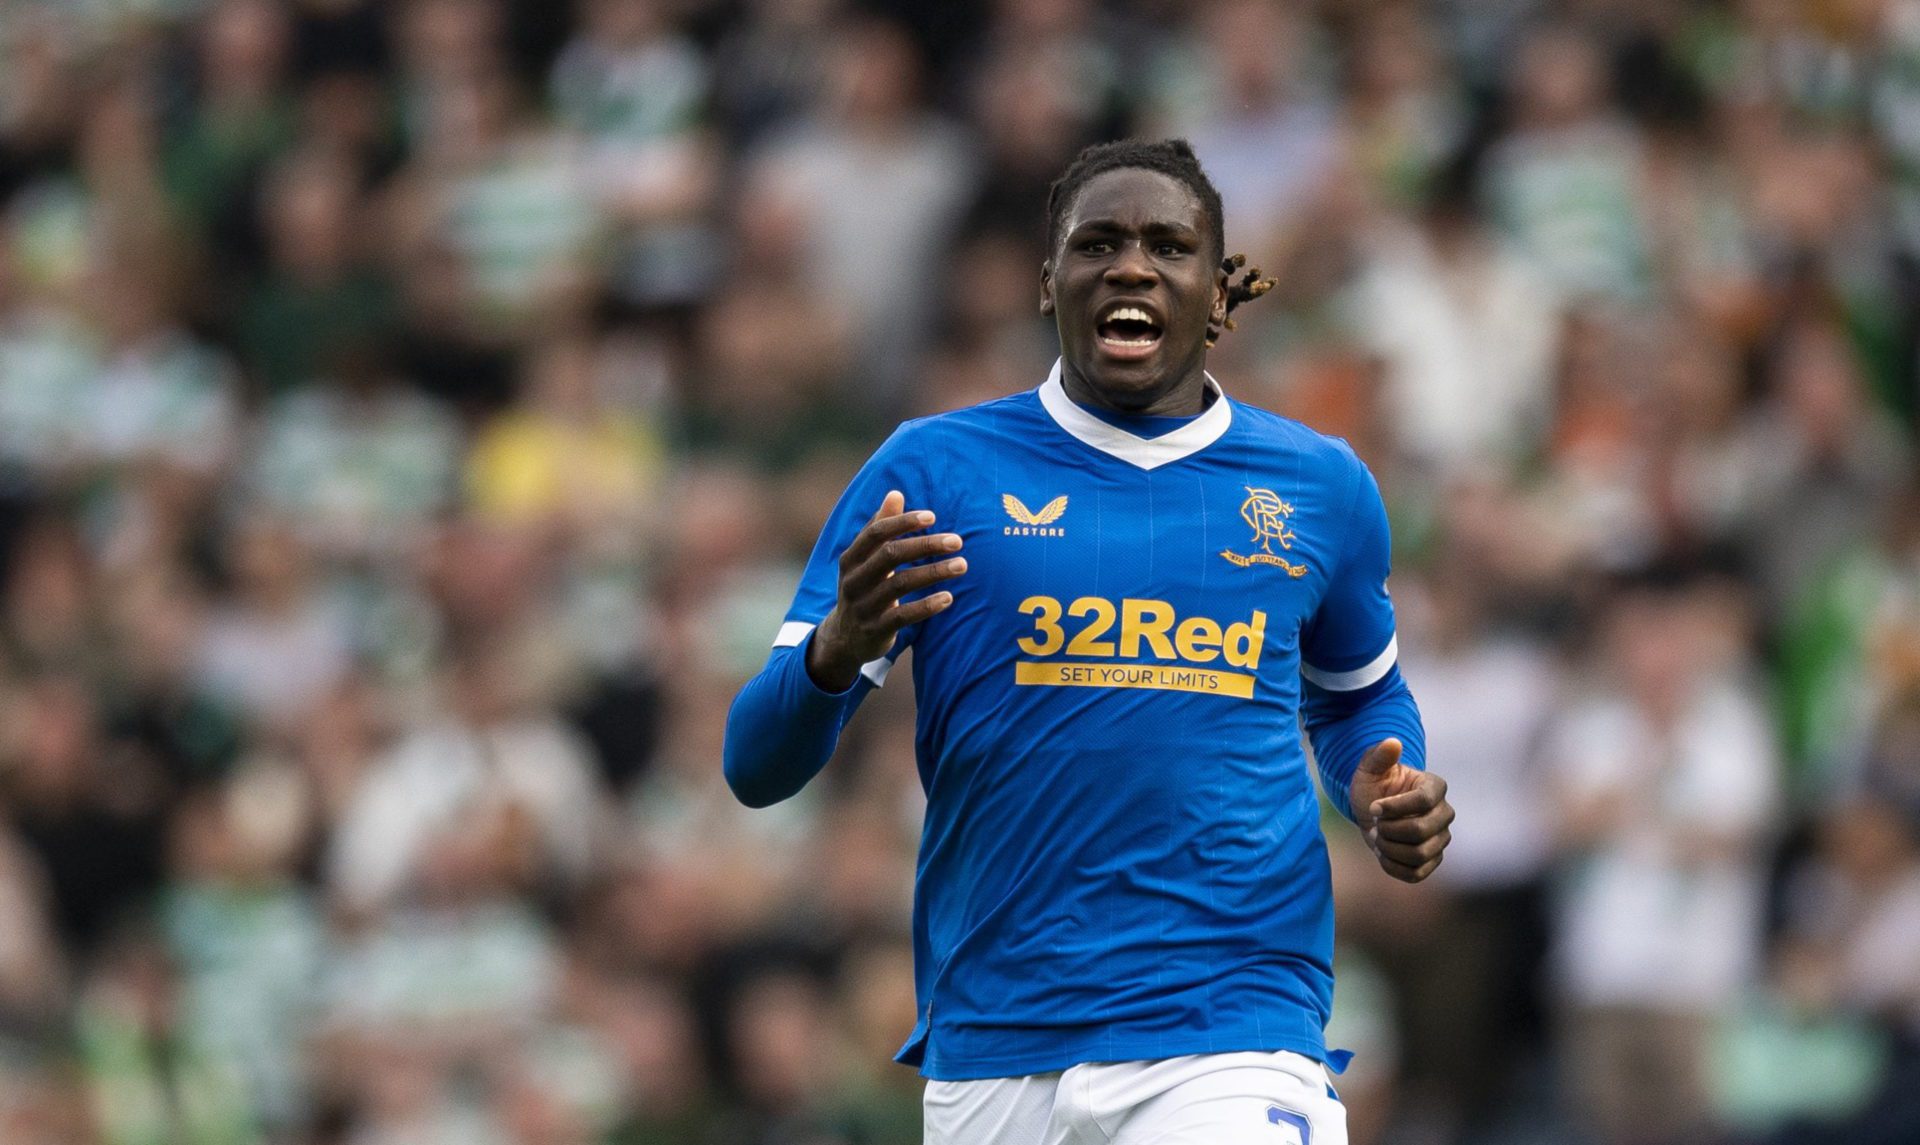 Alison McConnell: Calvin Bassey big bucks could seal Rangers’ firm financial footing